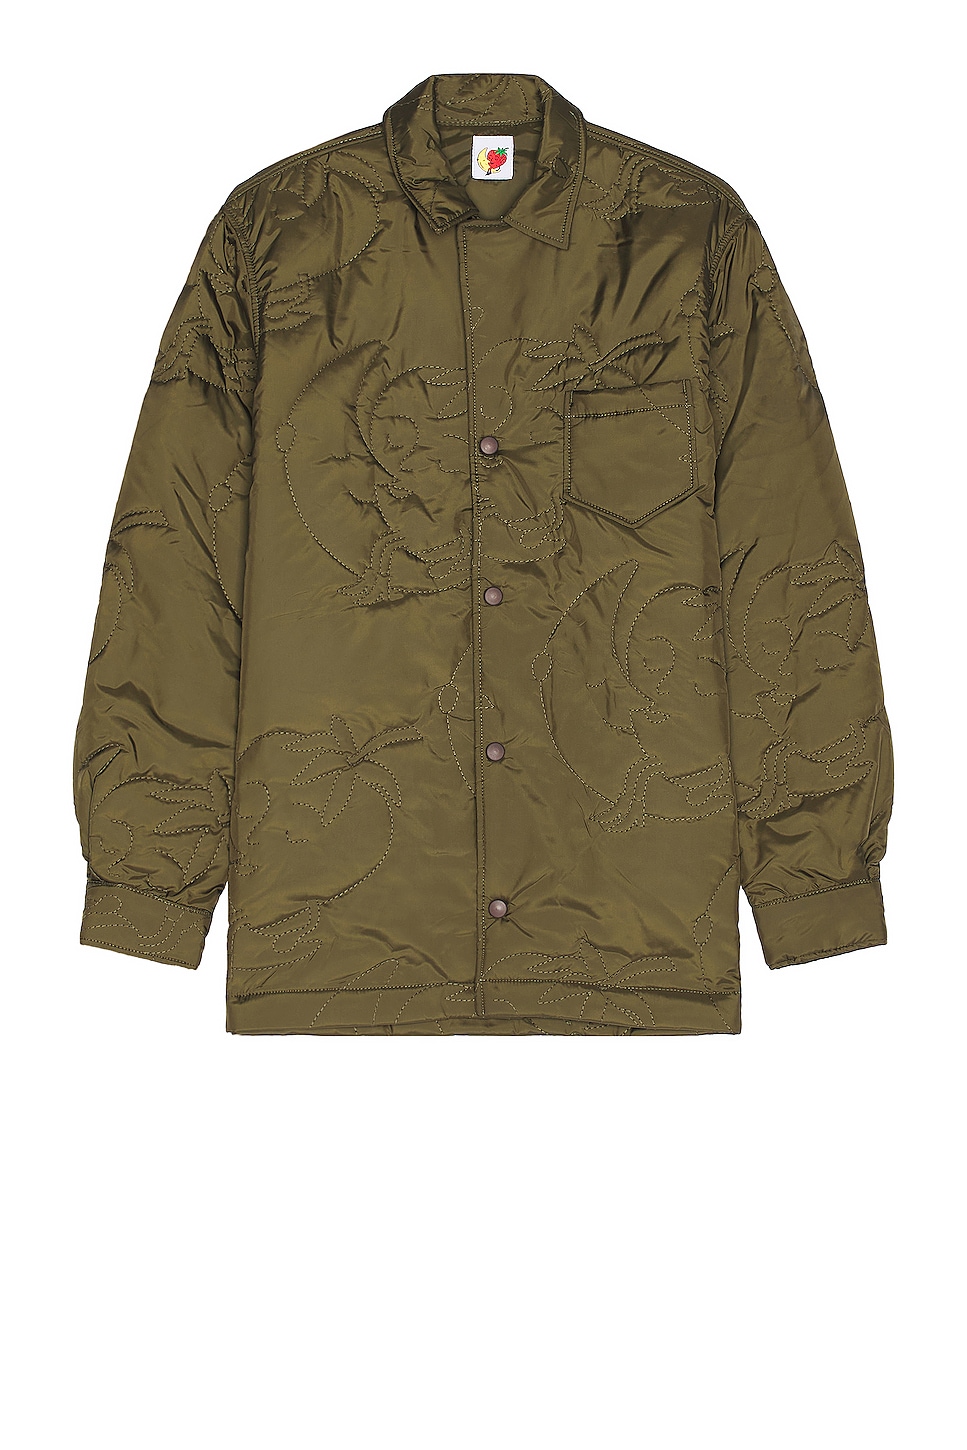 Image 1 of Sky High Farm Workwear Unisex Heidi Bivens Logo Quilted Shirt Woven in GREEN